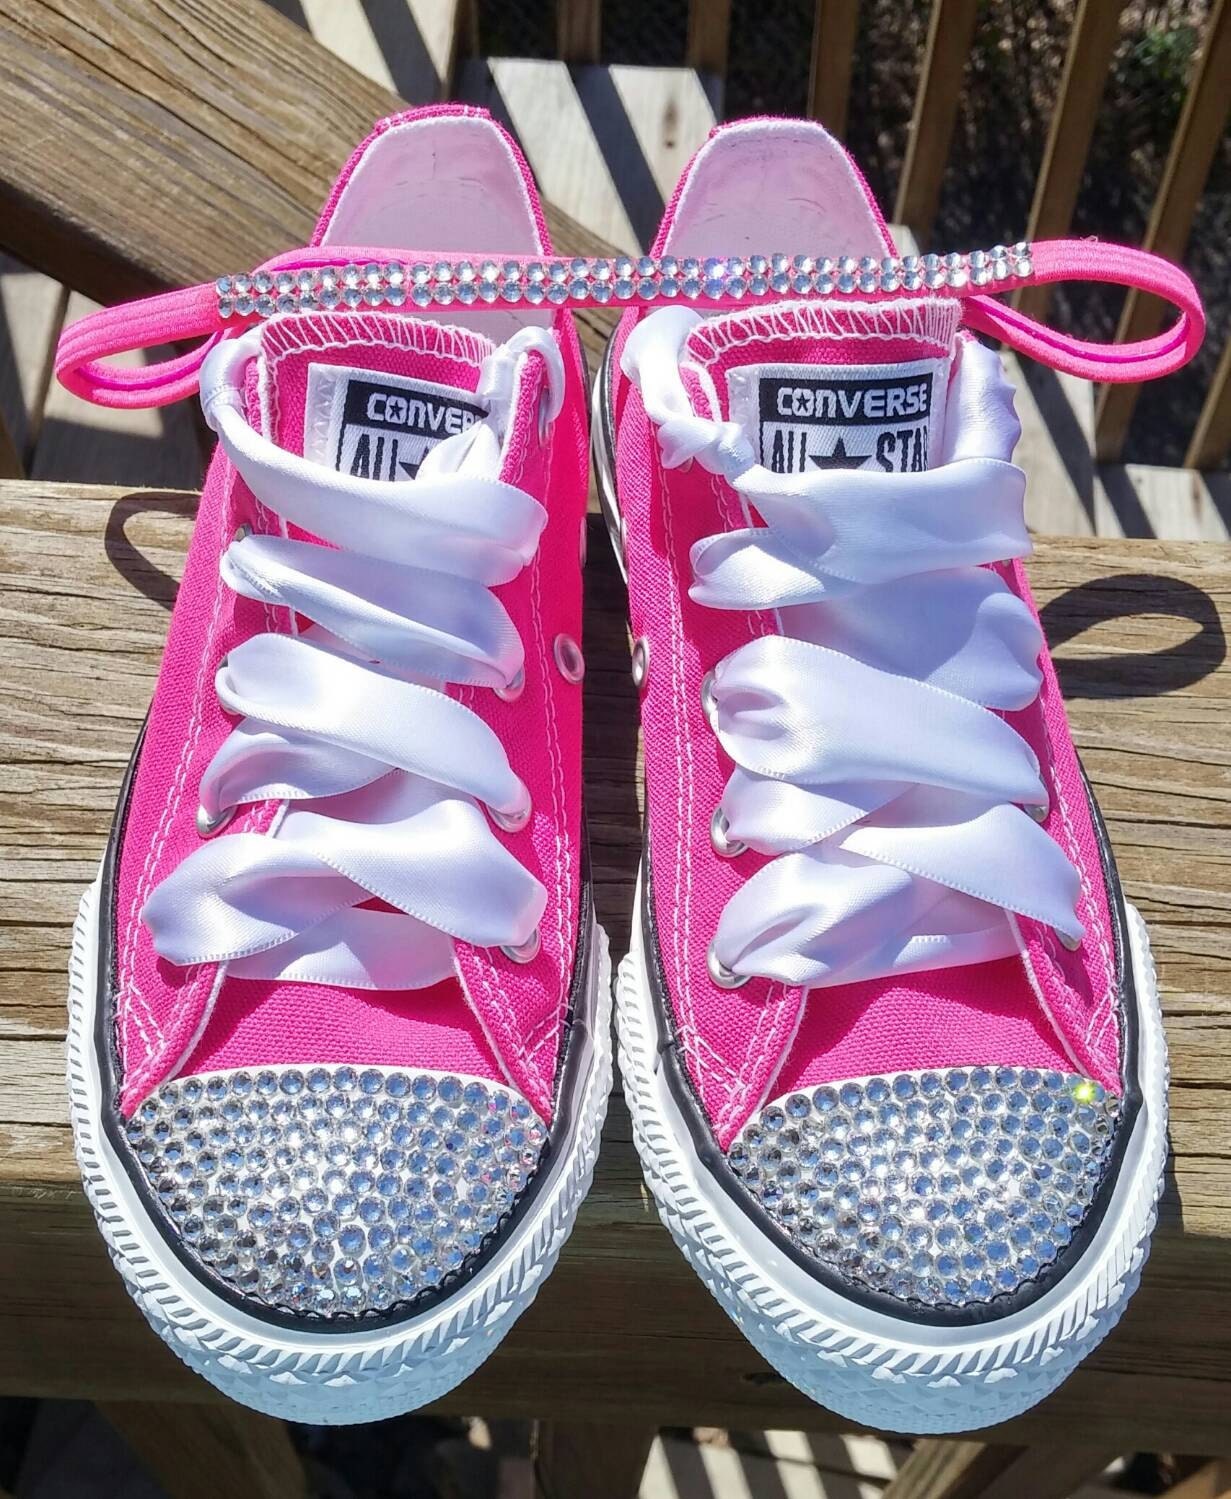 Toddler Shoes Blinged out Converse Toddler by AllureDesignz